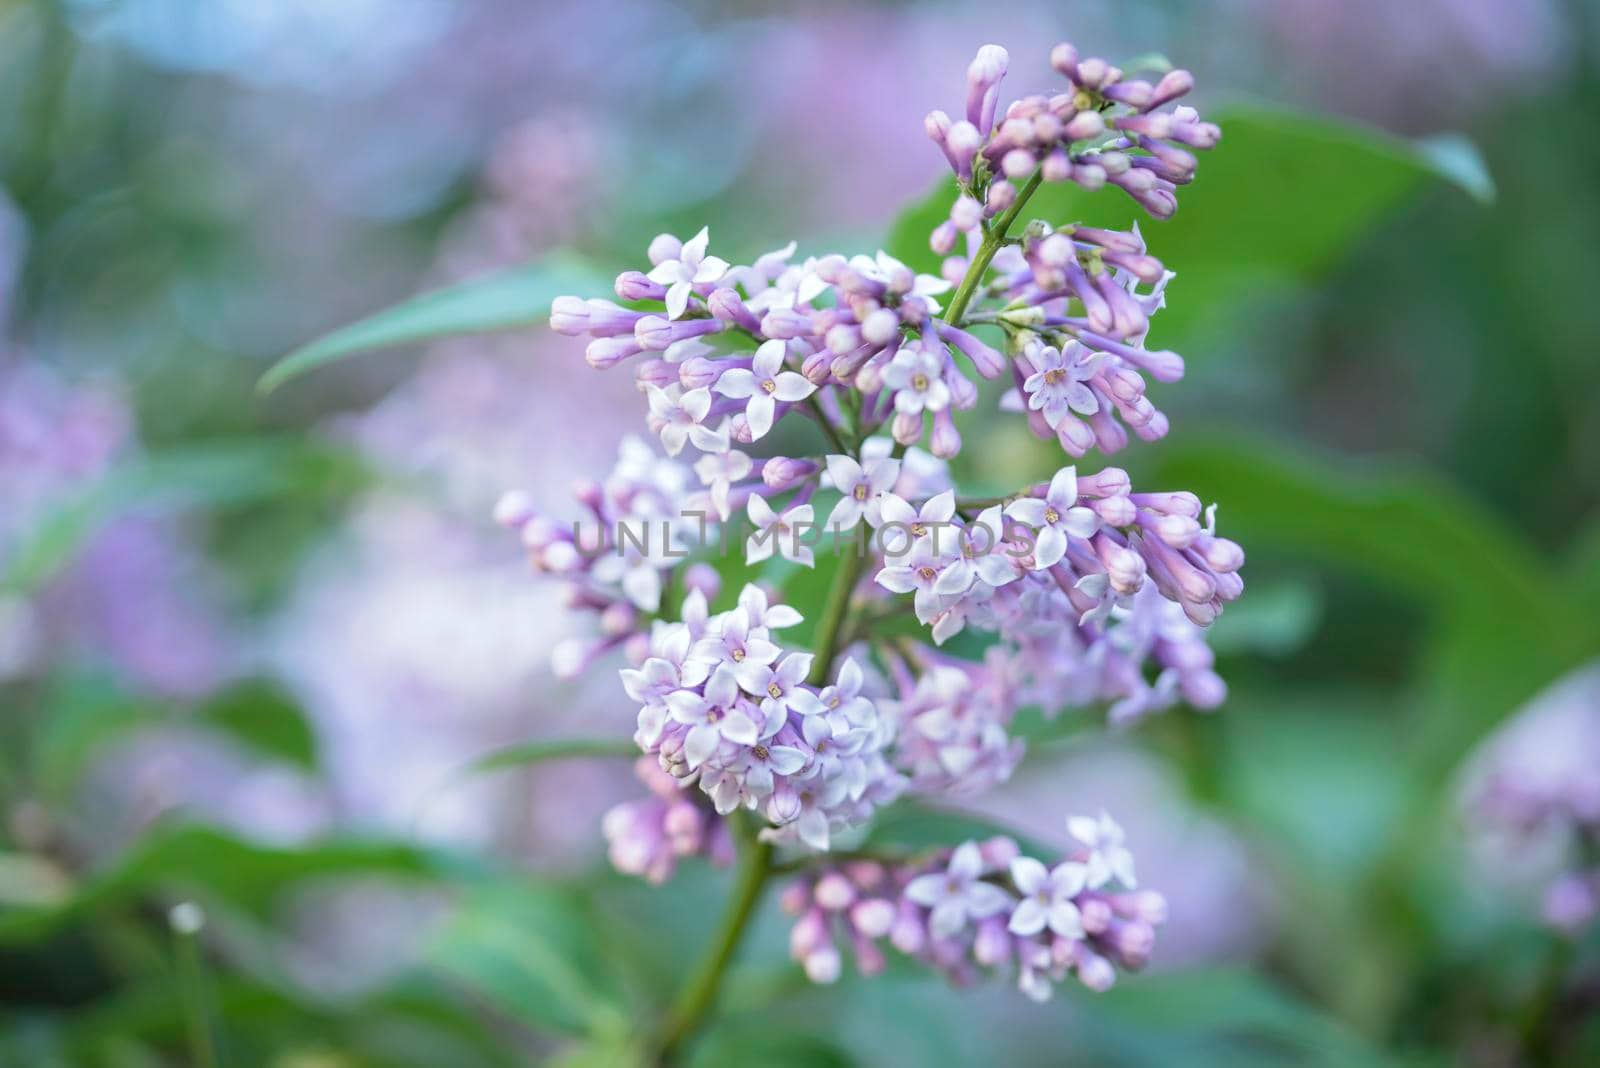 Branch of flowers of a lilac with green leaves by Estival